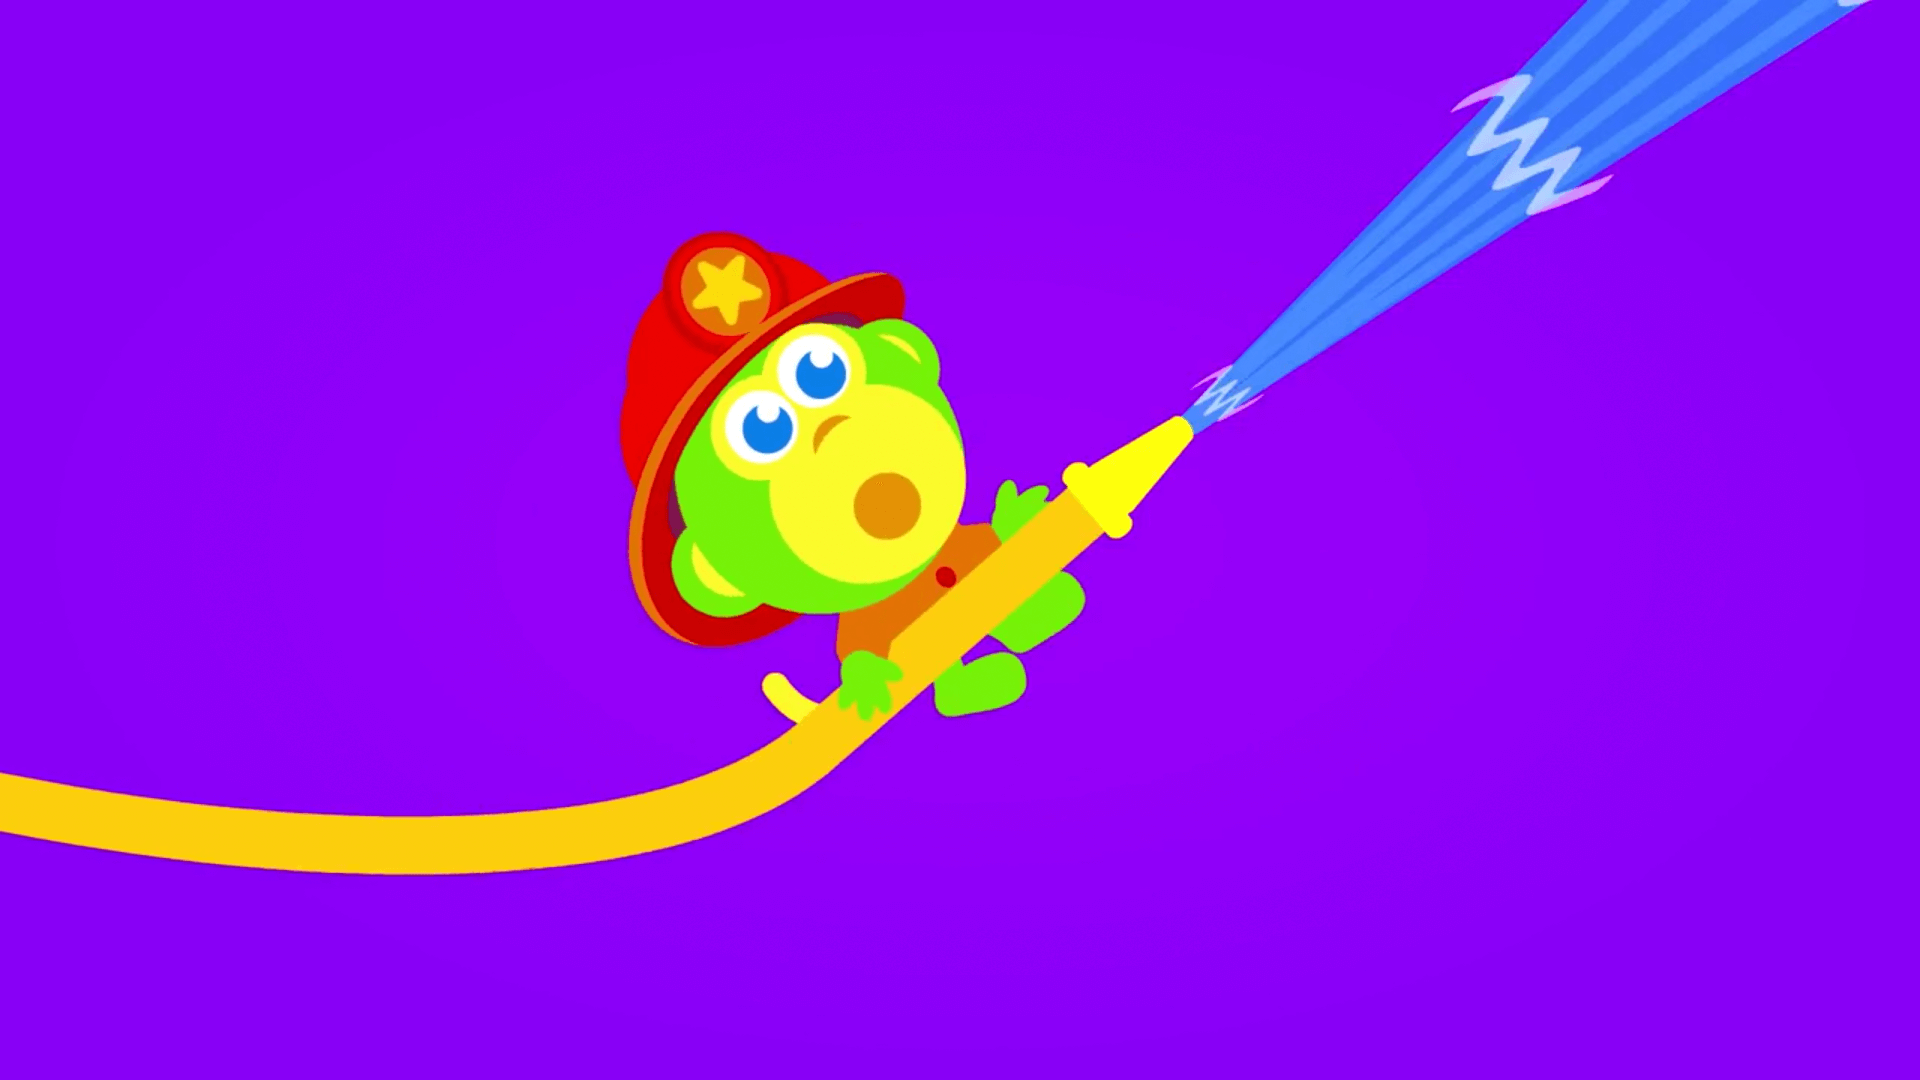 sammy uses a fire hose in episode of the kneebouncers show on babyfirsttv